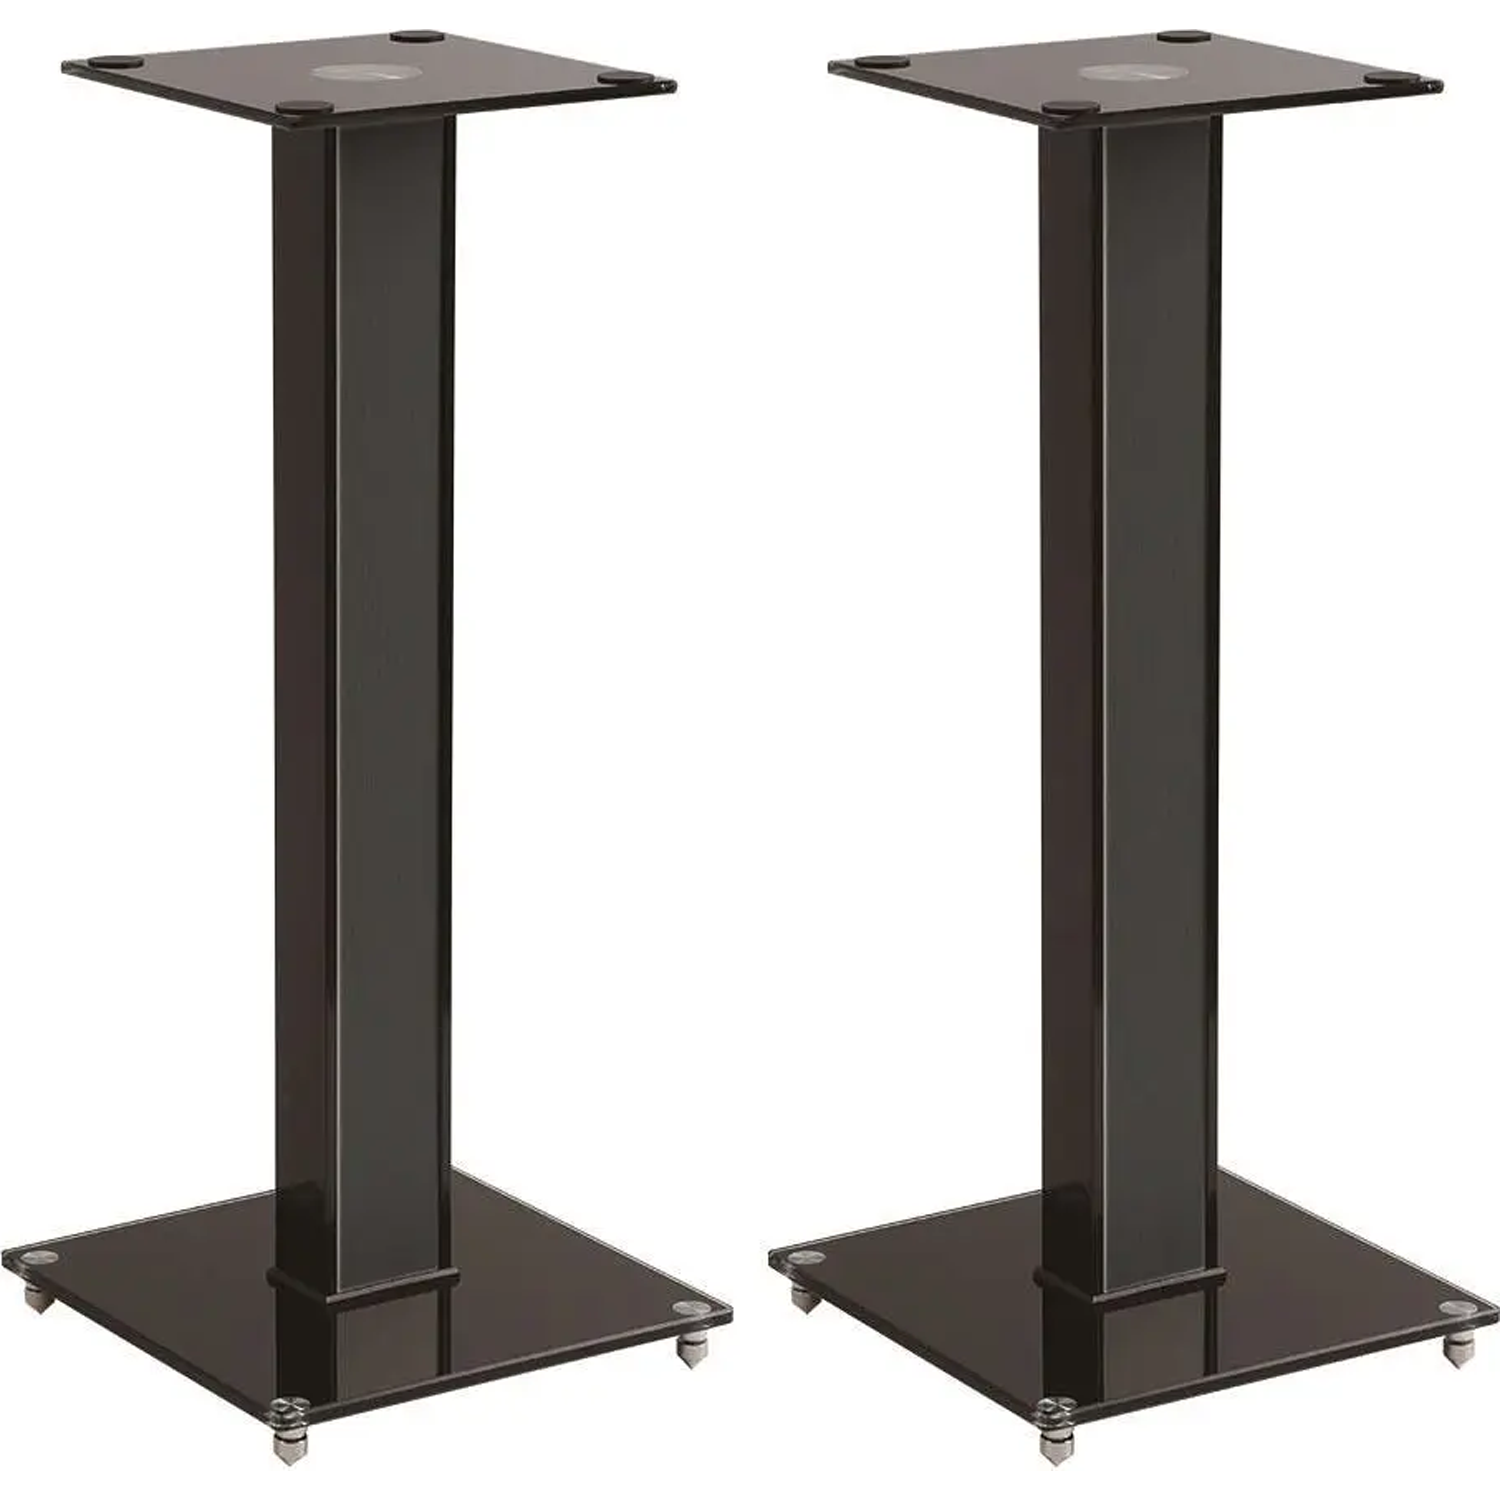 ETHEREAL Elements PAIR 23in Speaker Stand with Cable Management